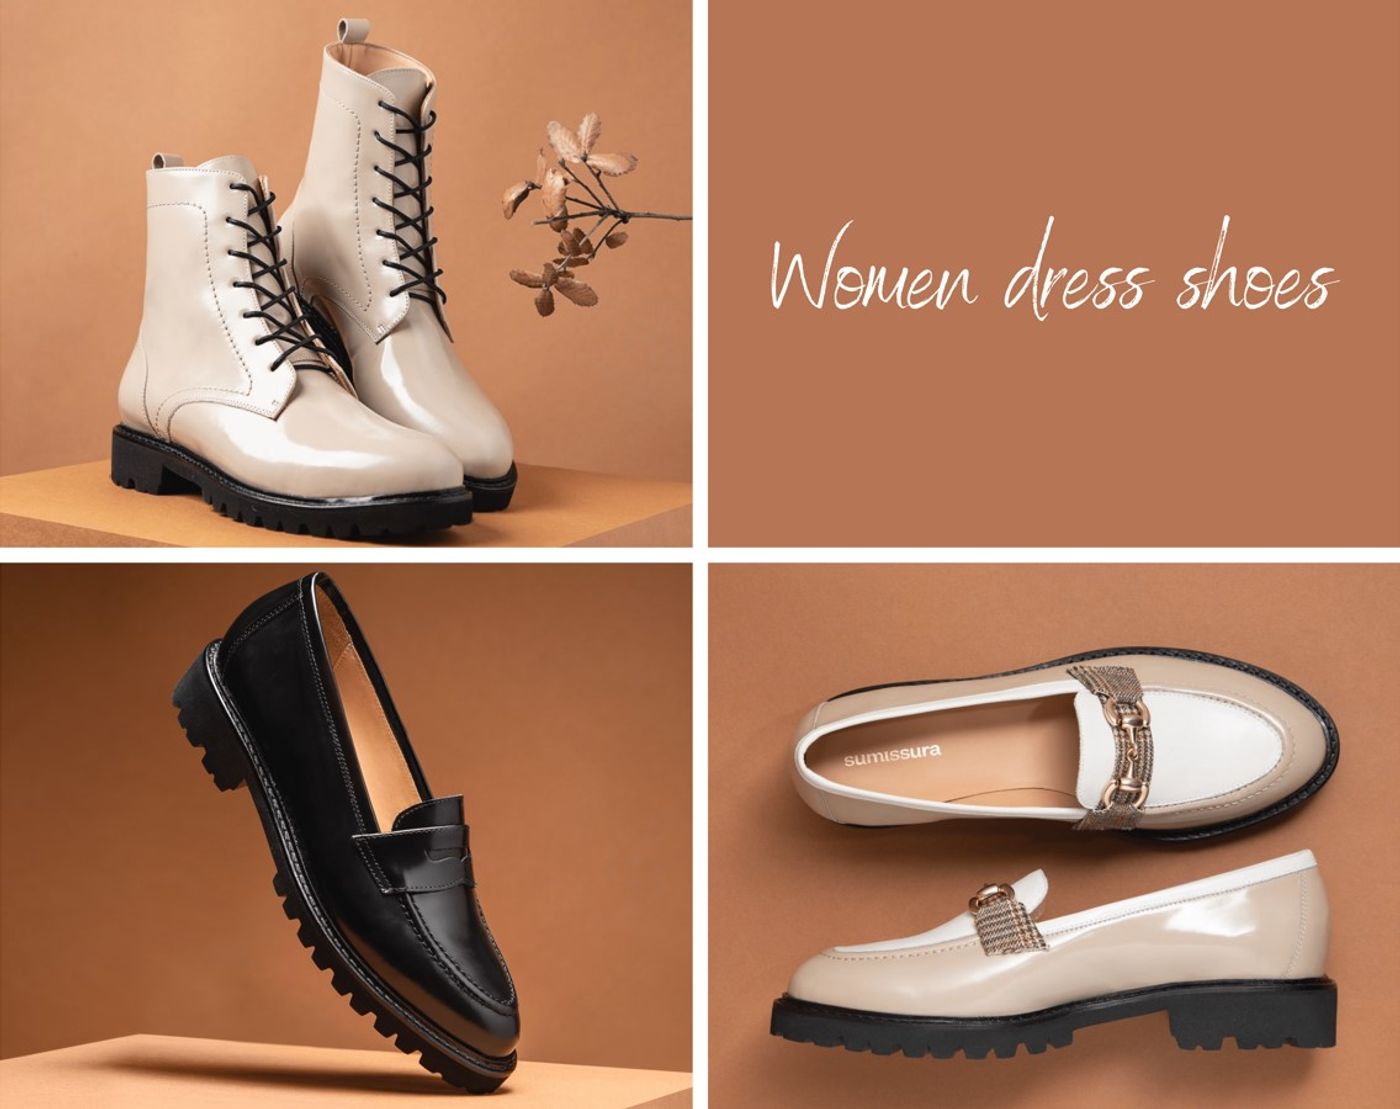 5 most comfortable dress shoes for women